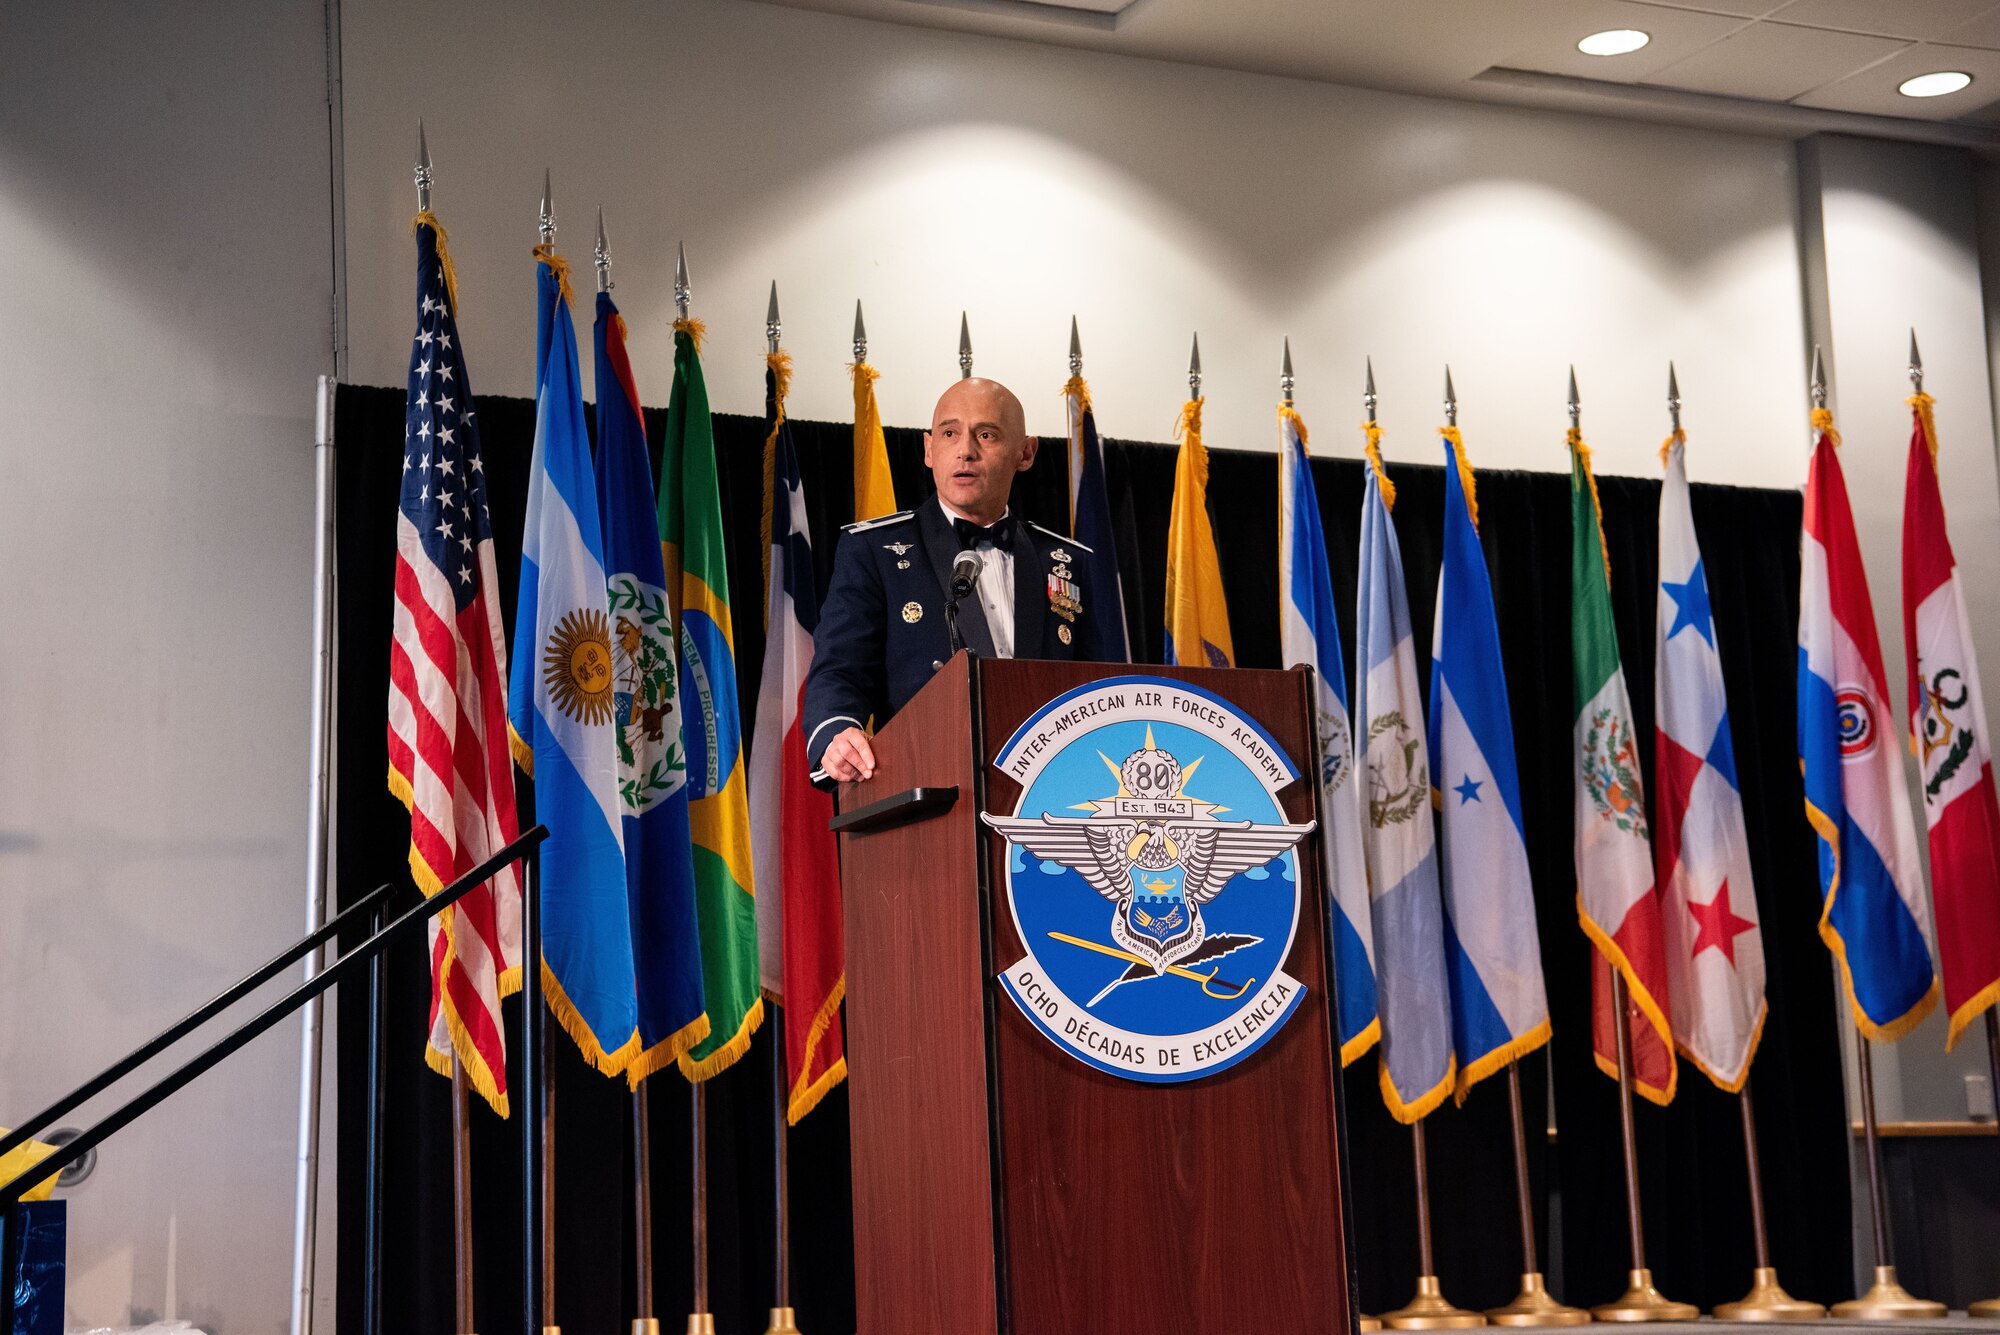 Col. José Jiménez, Jr., commandant of the Inter-American Air Forces Academy, looks up while speaking  at the IAAFA Graduation Banquet and 80th anniversary celebration, at San Antonio, Texas, April 26, 2023. More than 60 international military students from seven partner nations and the USAF graduated during the first training cycle of 2023. IAAFA provides instruction in professional military education and leadership, aircrew training and technical courses – all in Spanish. (U.S. Air Force photo by Vanessa R. Adame)